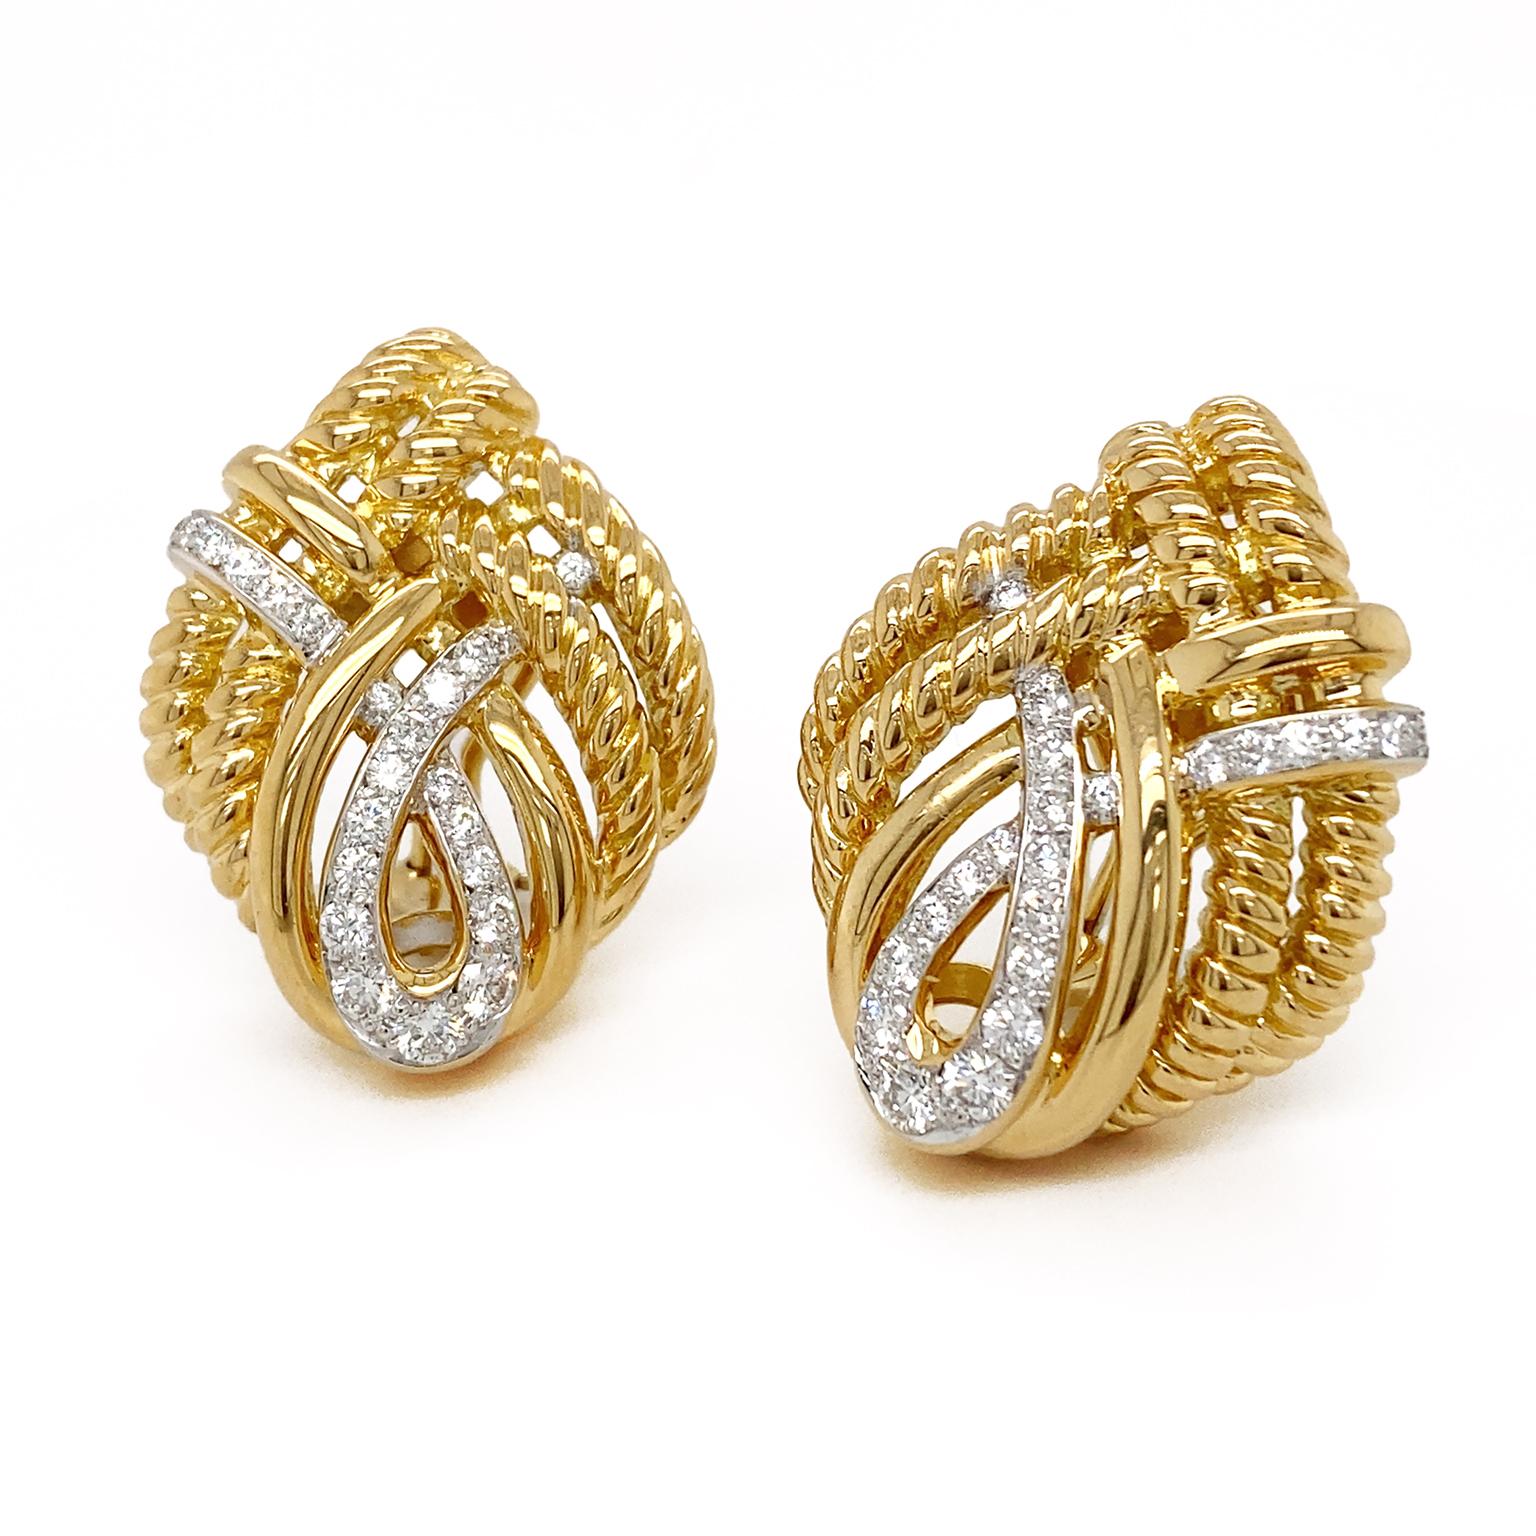 Intricacy and illumination combine for these earrings. 18k yellow gold ropes intertwine to form a subtle teardrop shape. Braided within are a smooth gold band on top and another one interlocked with that made of pavé set brilliant cut diamonds for a